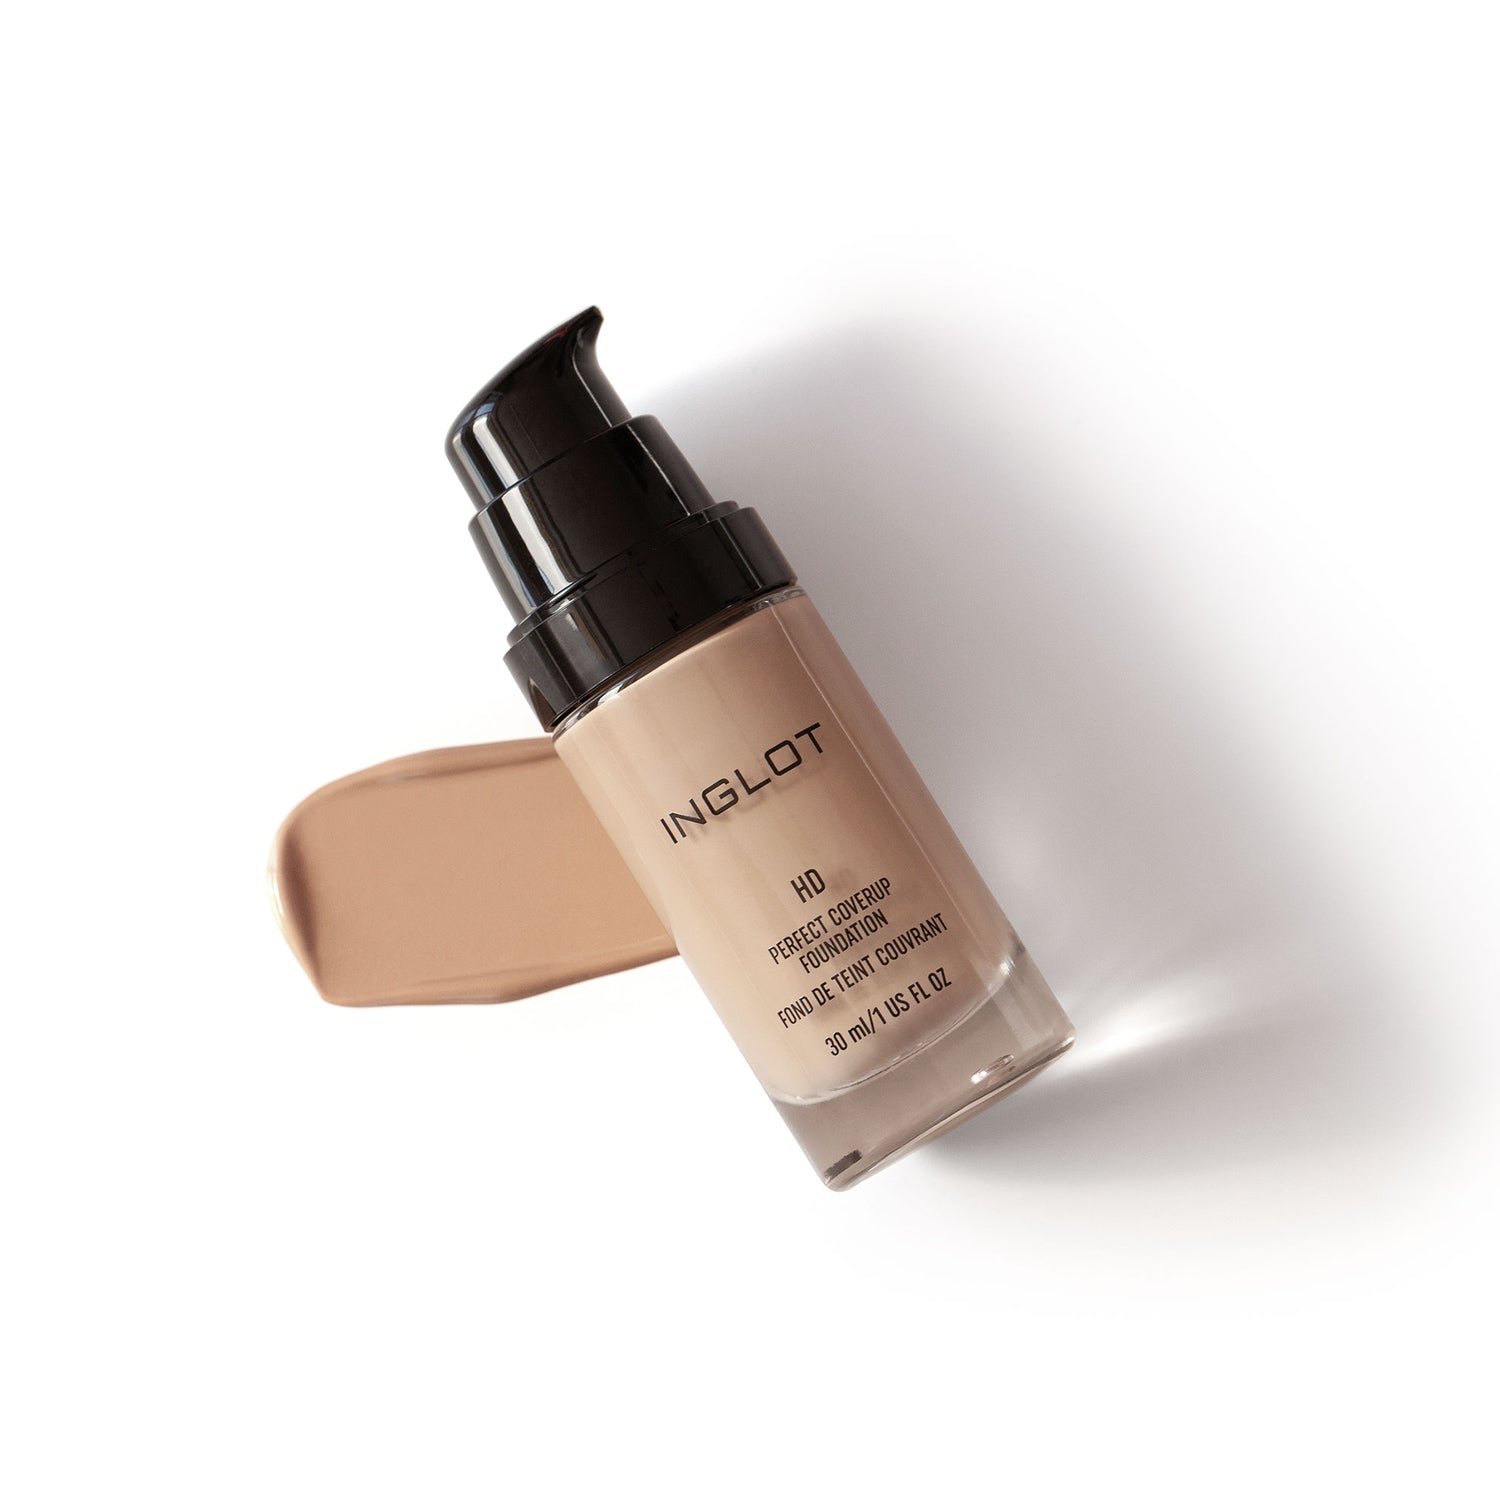 HD Perfect Coverup Foundation 73 - Inglot Cosmetics